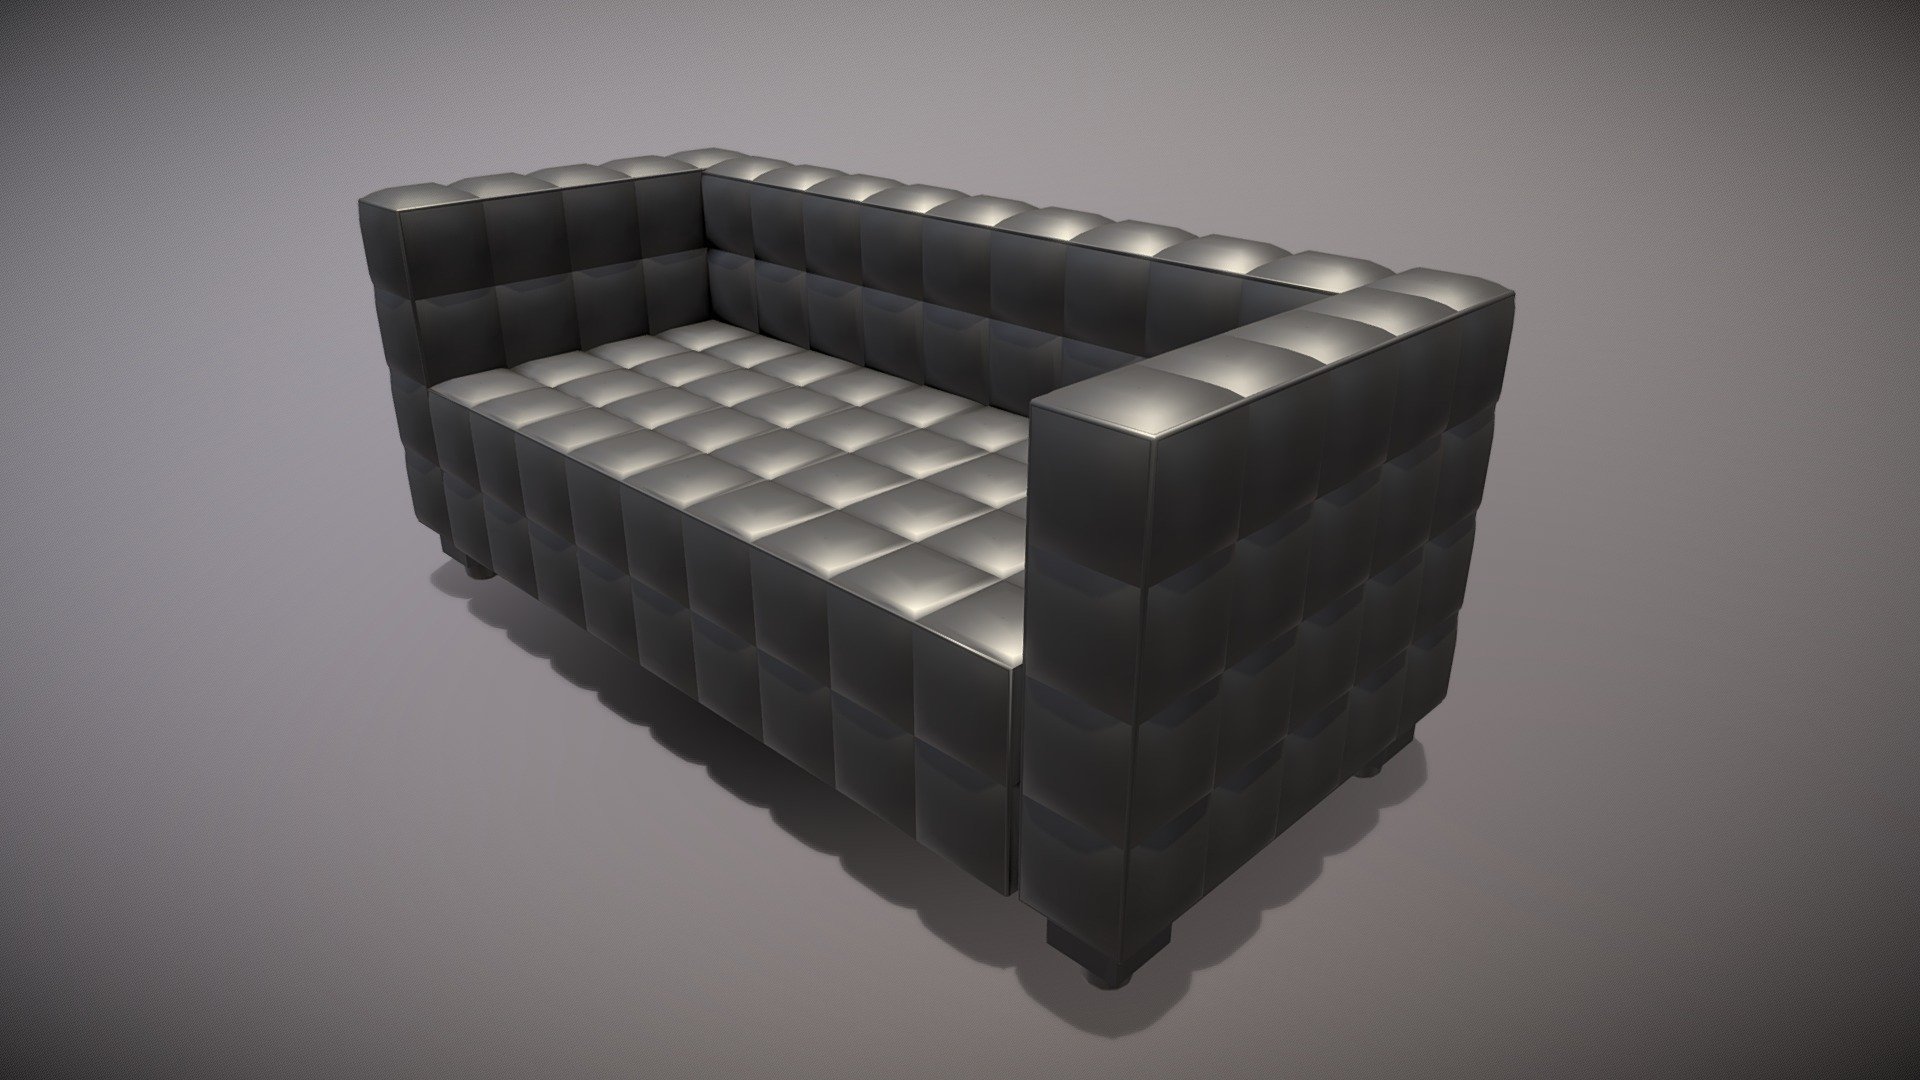 A lowpoly realistic sofa with bohemian design. A good fit for metaverse, VR, AR, or environment object for games. 6510 Tris, Available PBR Textures (4096x4096) : -Static Lightbaked Texture -AO -Roughness -Normal -Diffuse - Lowpoly Realistic Bohemian Sofa 2 - 3D model by Underground Lab (@xaverius0404) 3d model